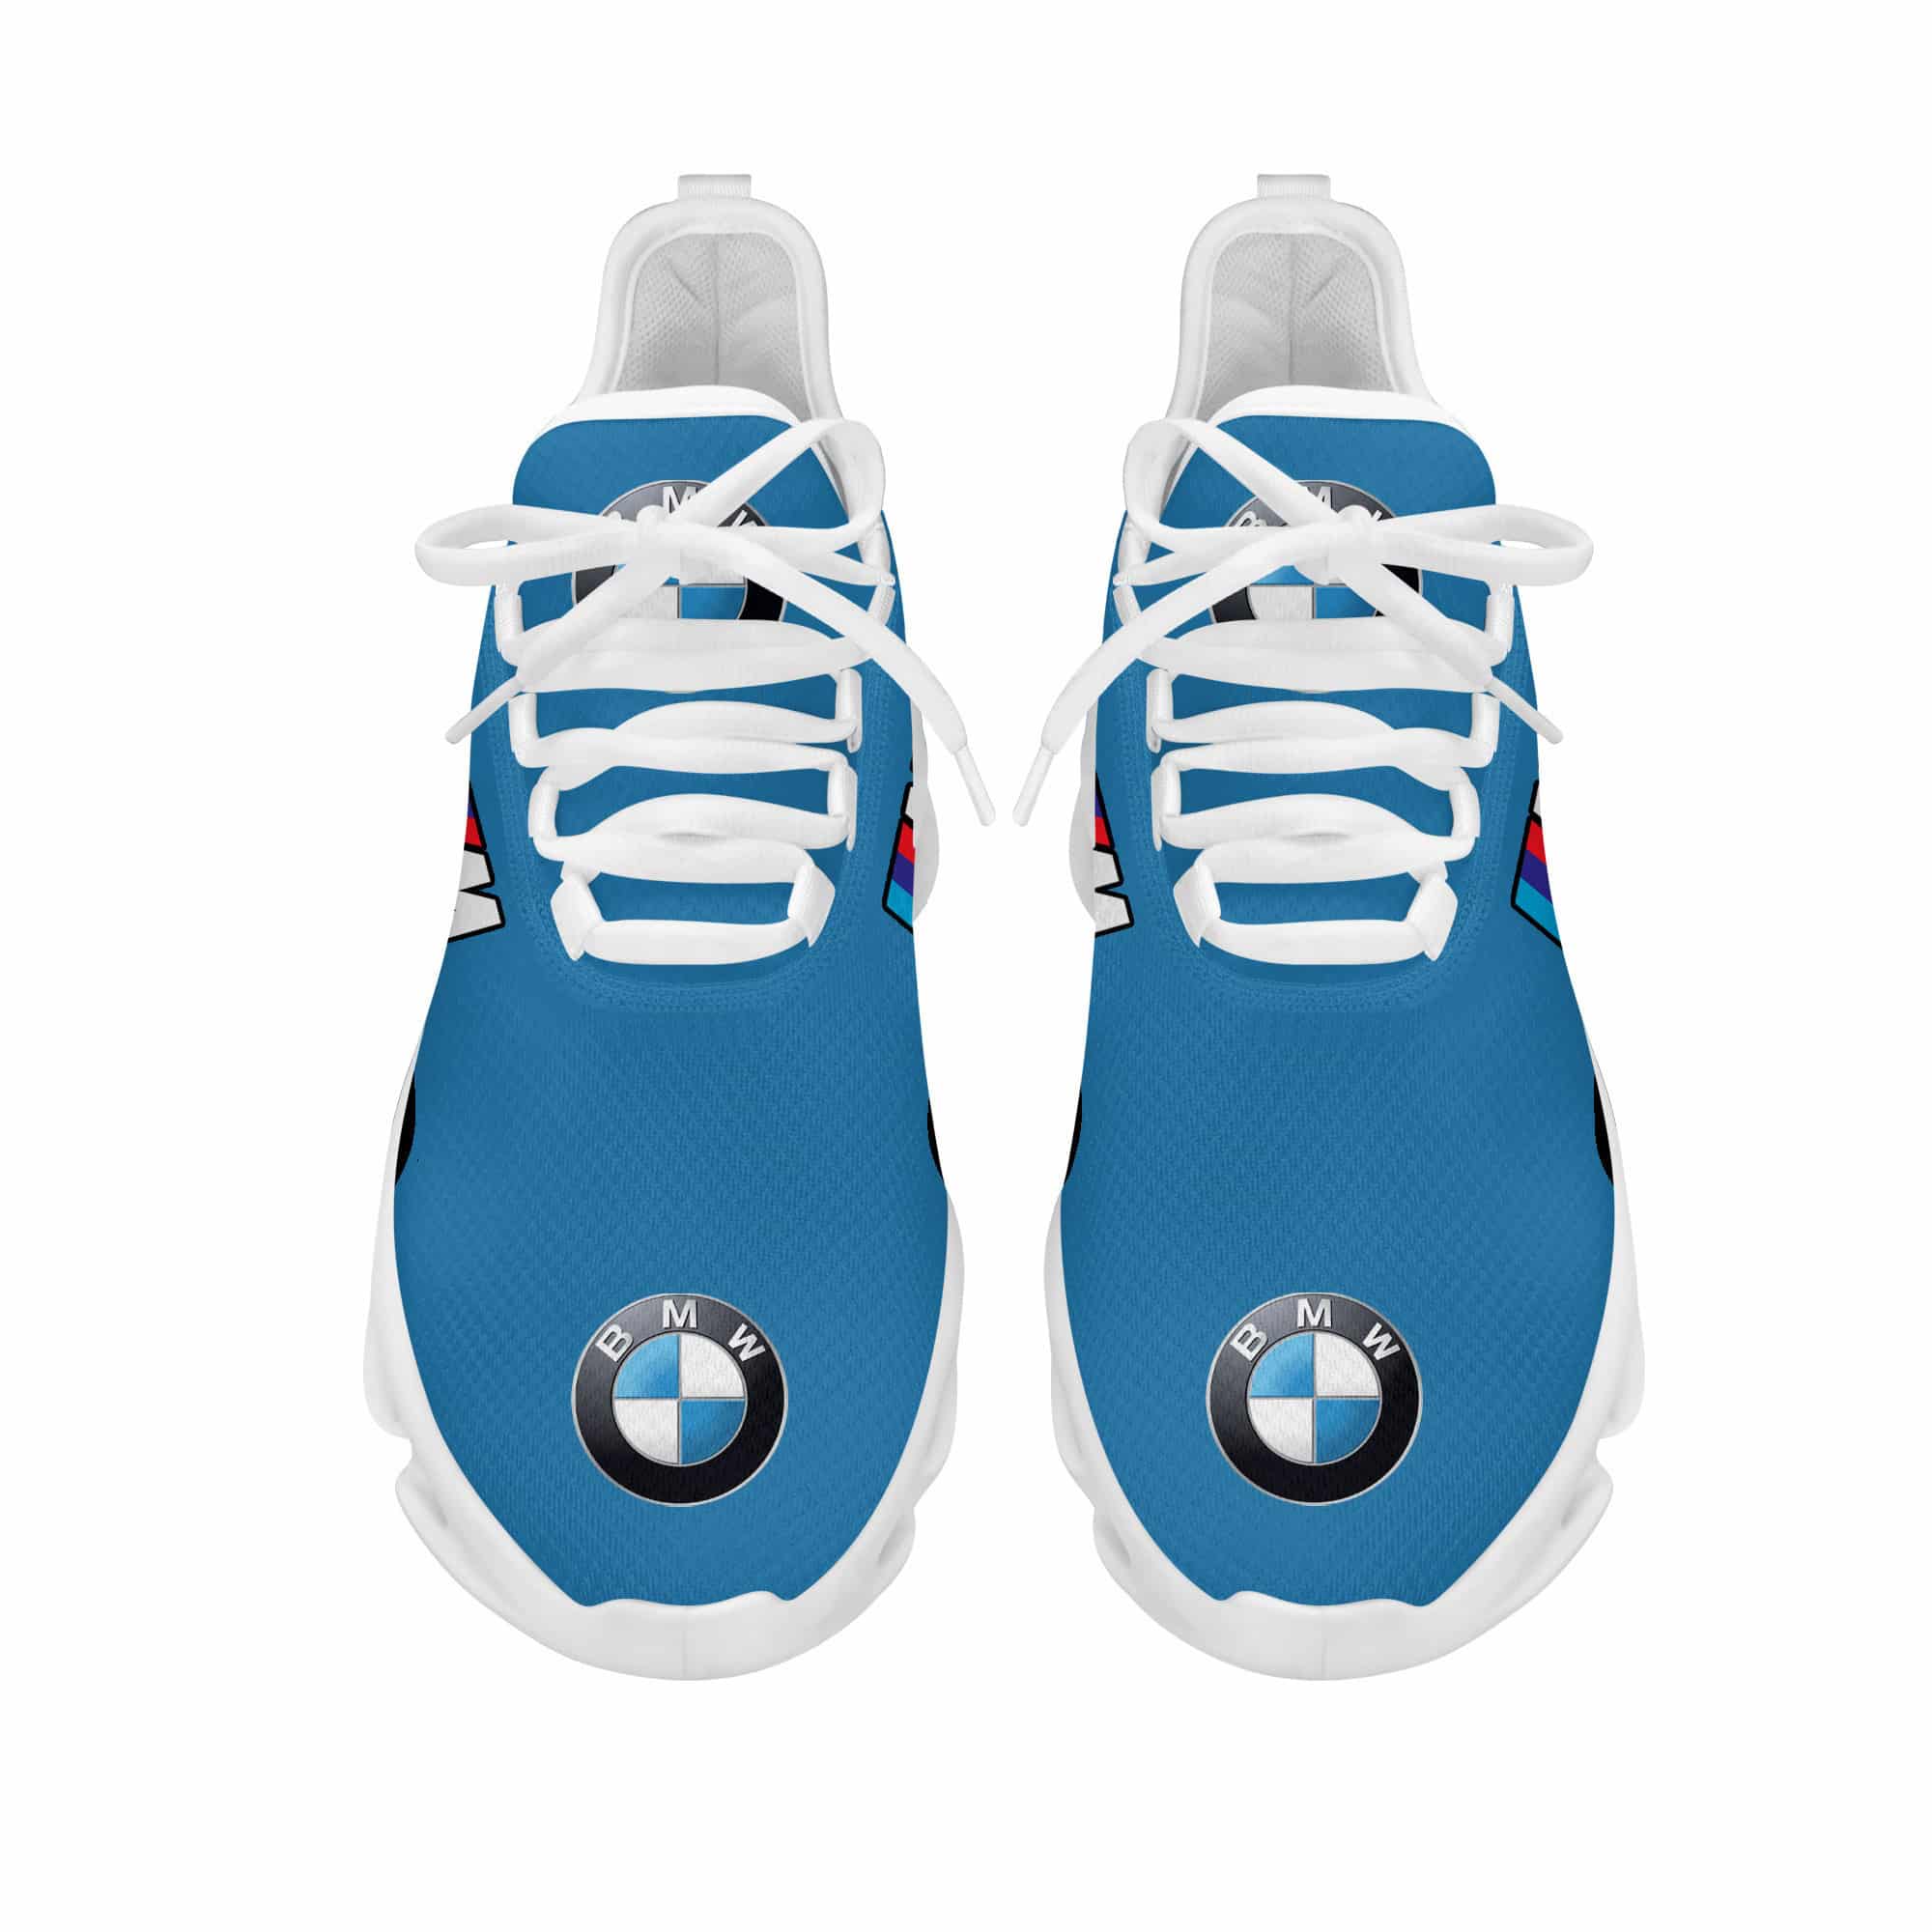 Bmw M Running Shoes Max Soul Shoes Sneakers Ver 7 4